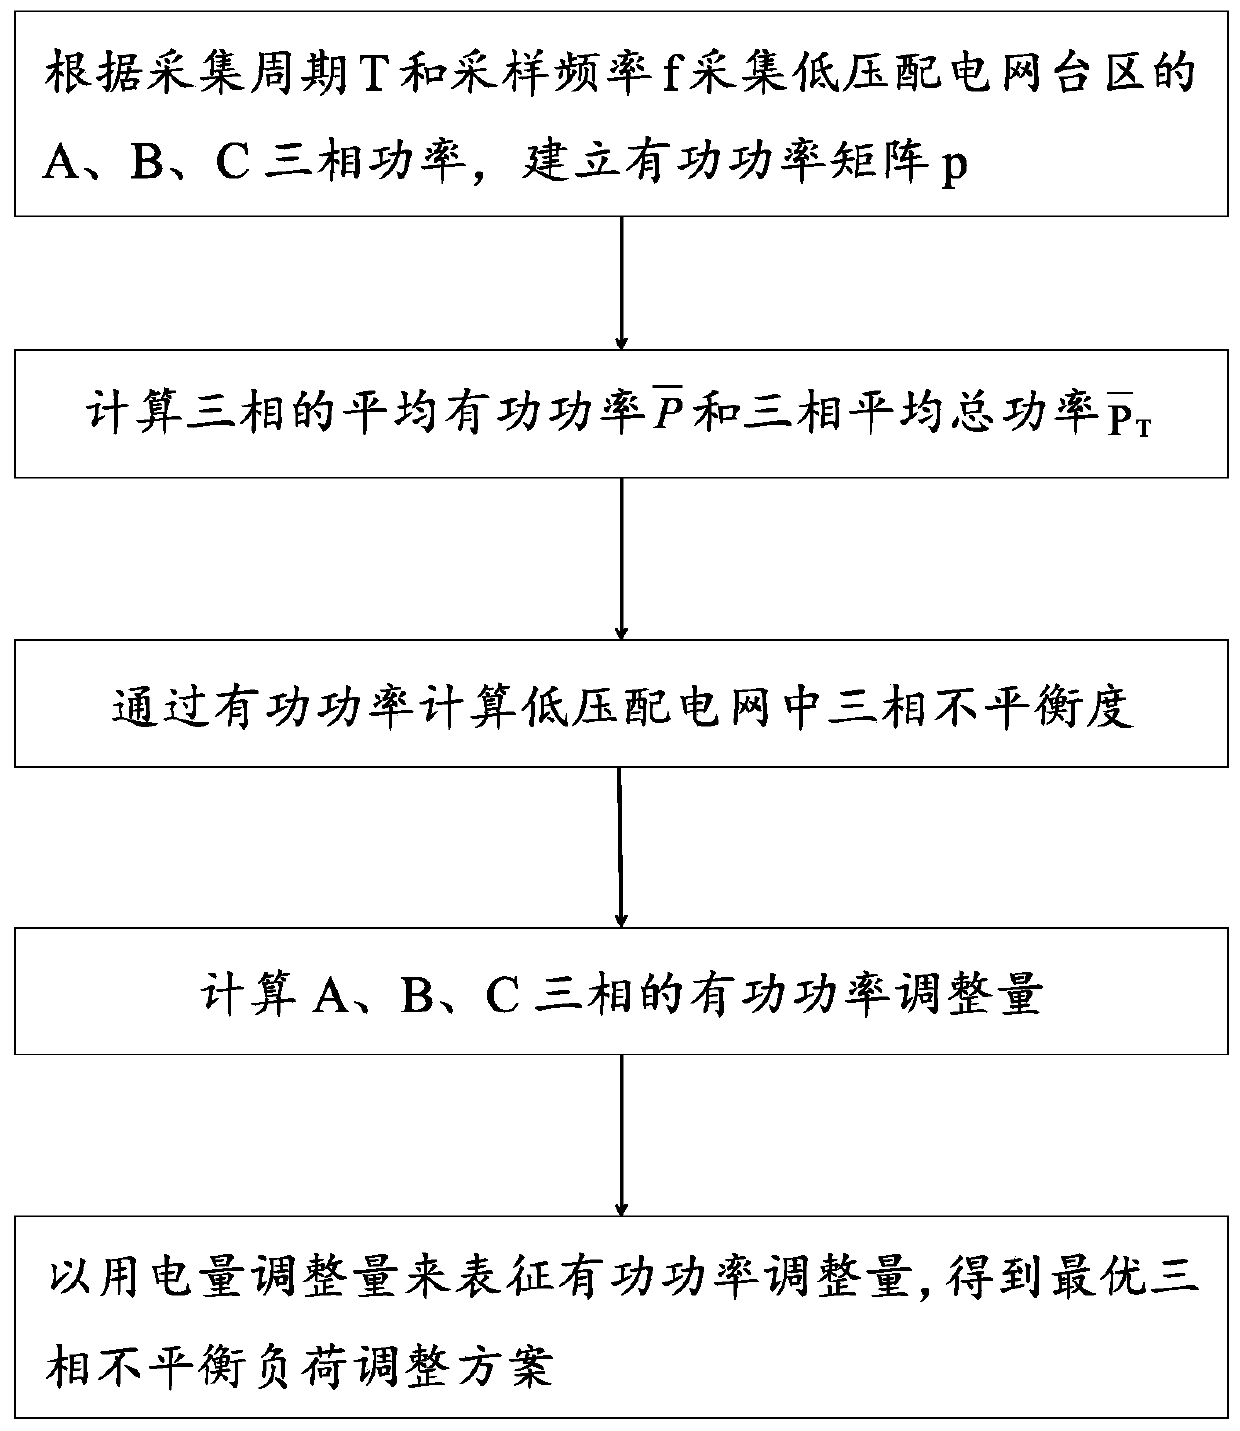 Three-phase unbalanced load adjustment method based on power and electricity consumption of low-voltage power distribution network